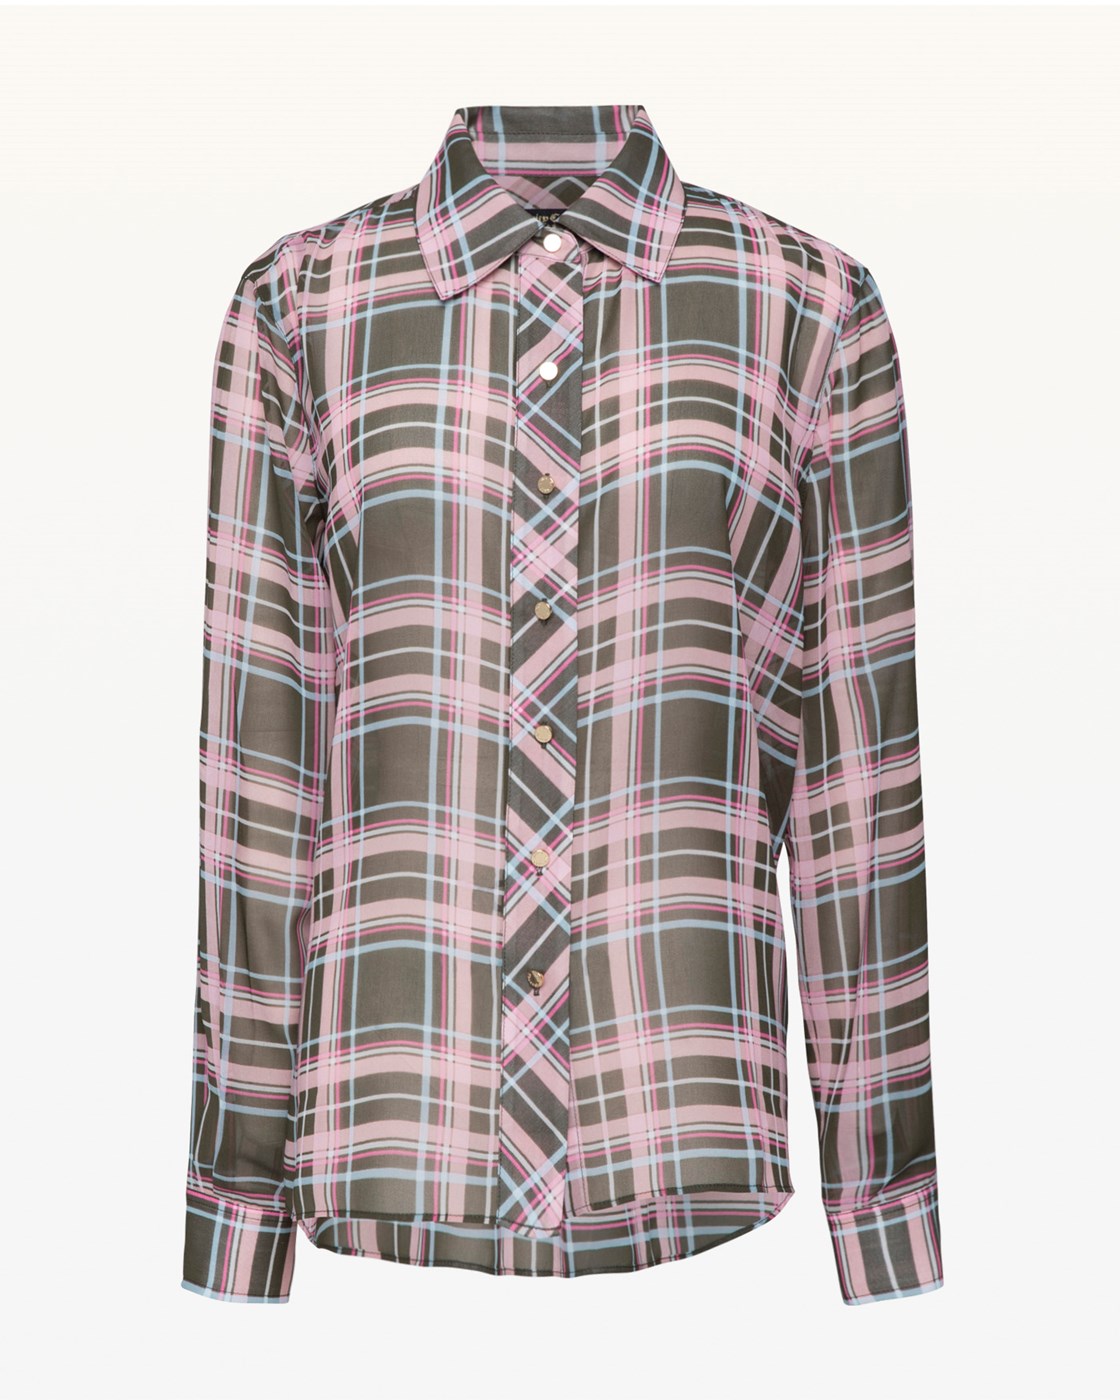 Juicy Couture Plaid Shirting Top